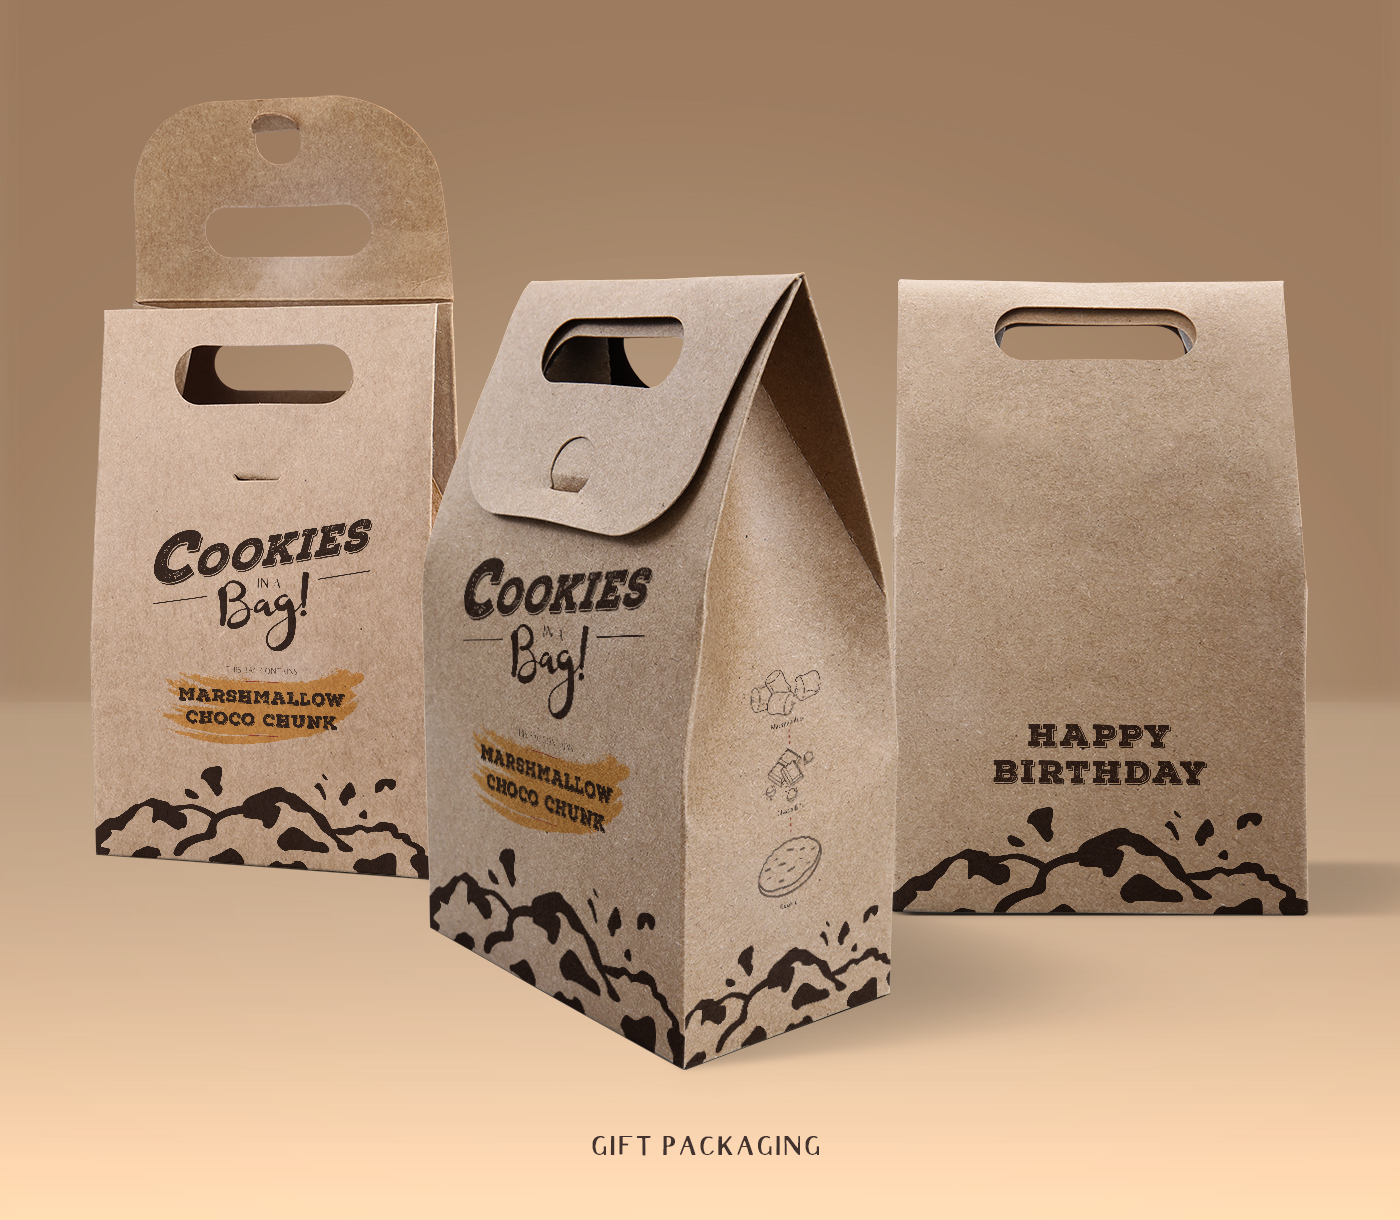 cookie bakery cookie in a bag identity chocolate chip baking cookies